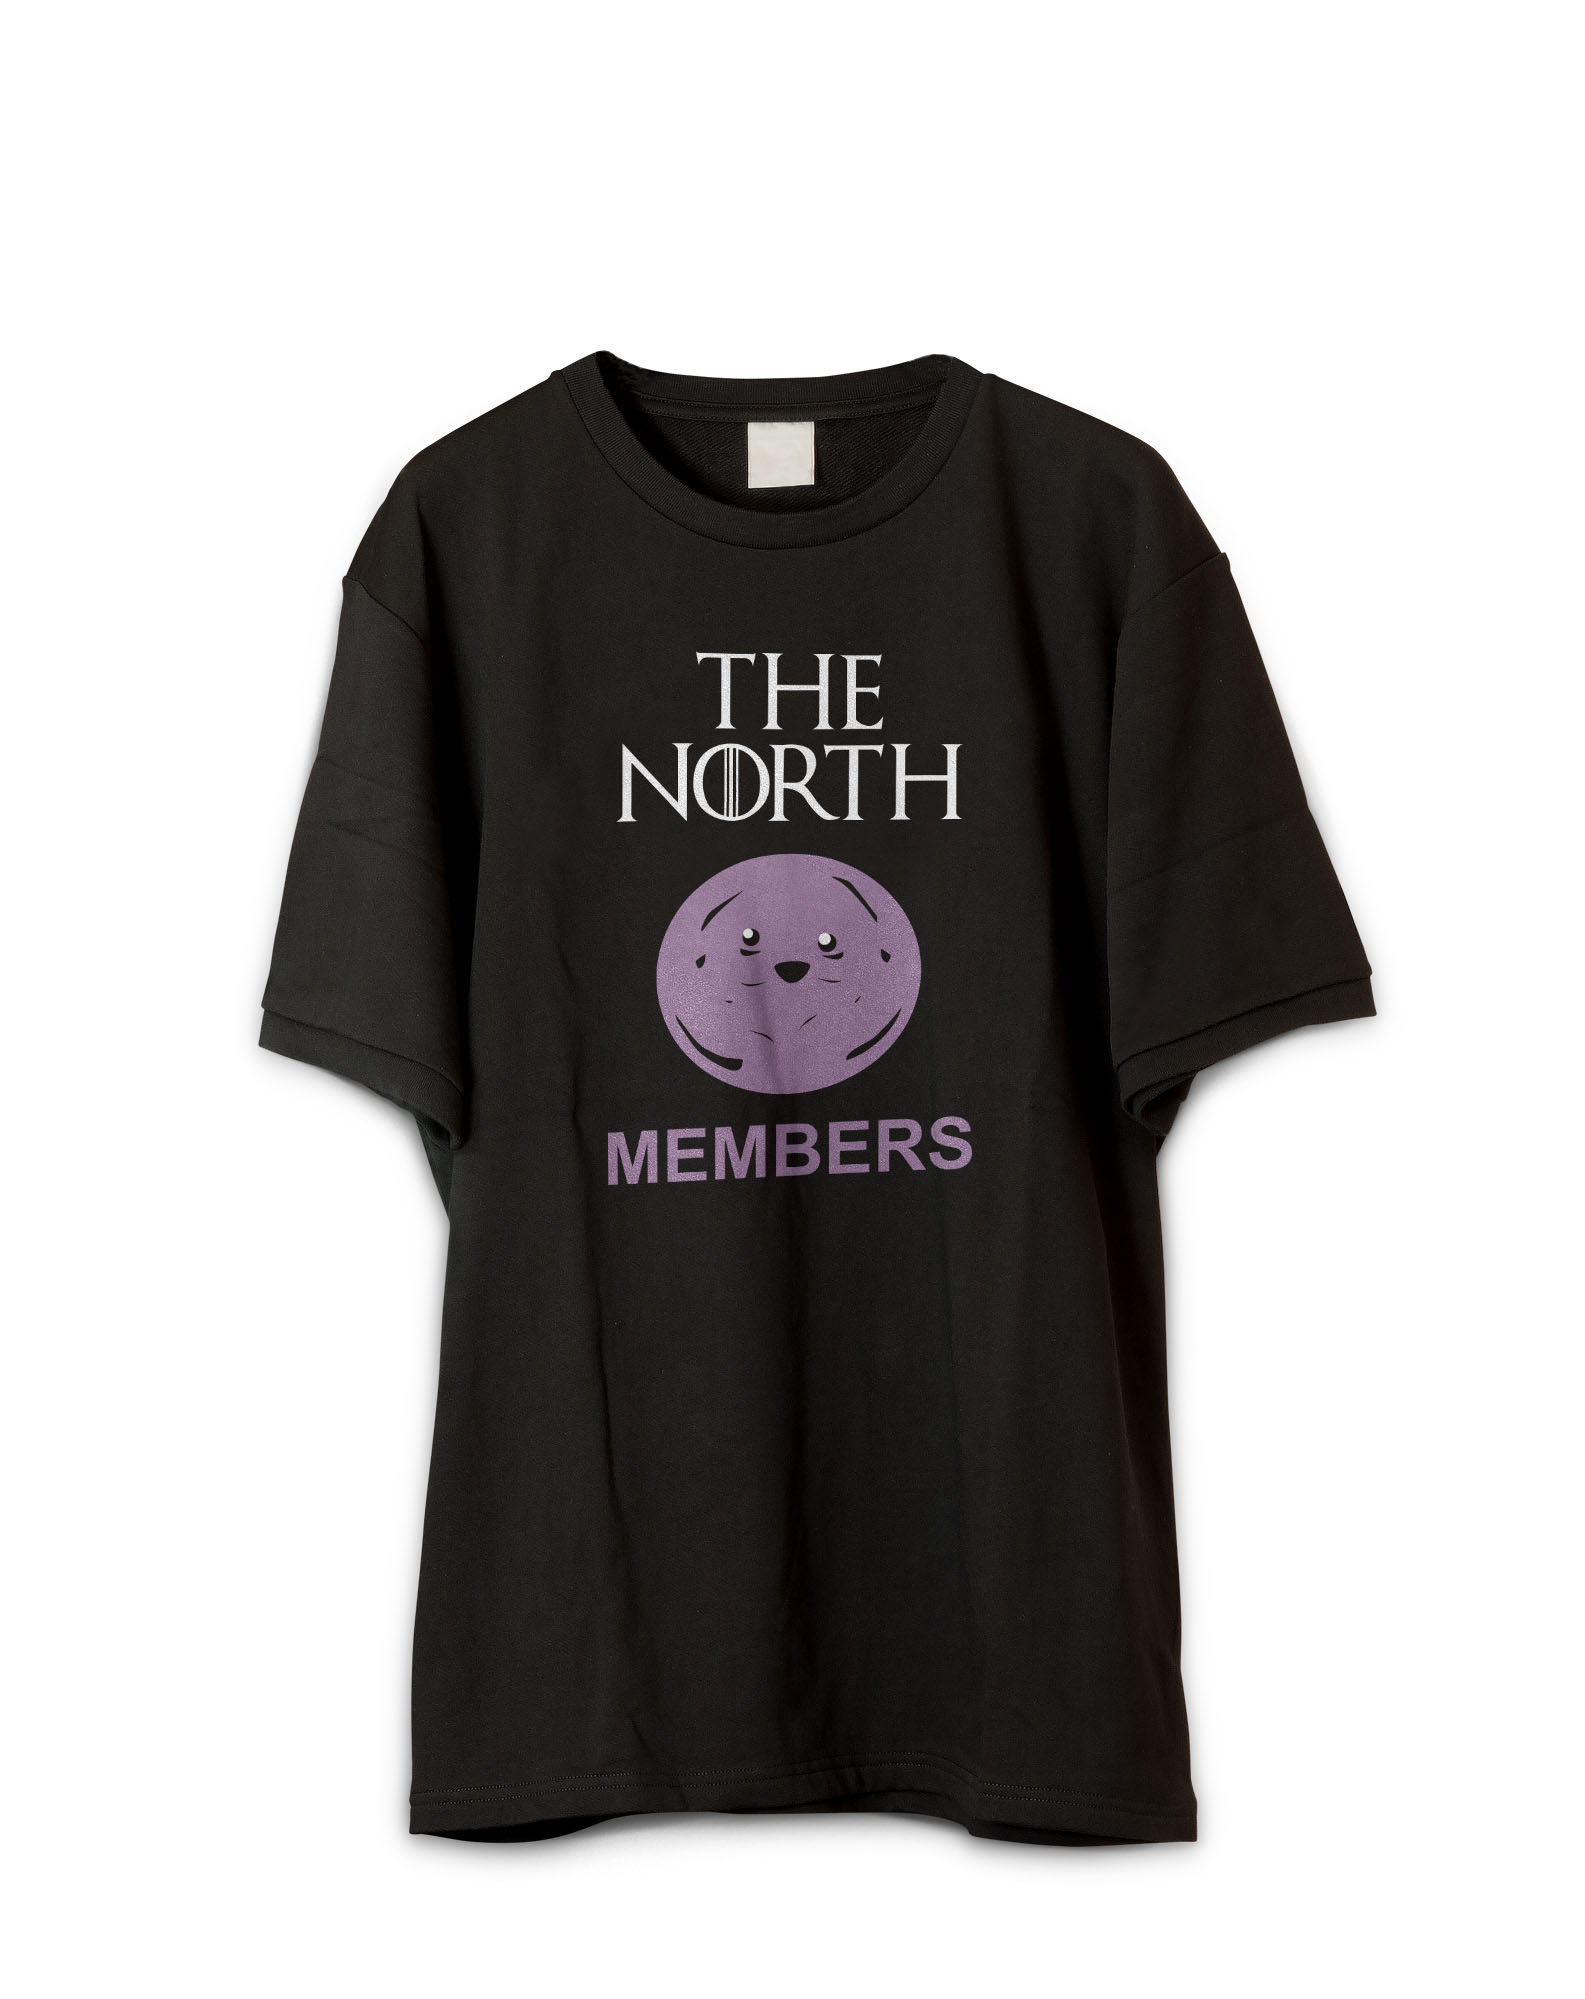 The North Members GOT South Park Inspired Funny T-Shirt